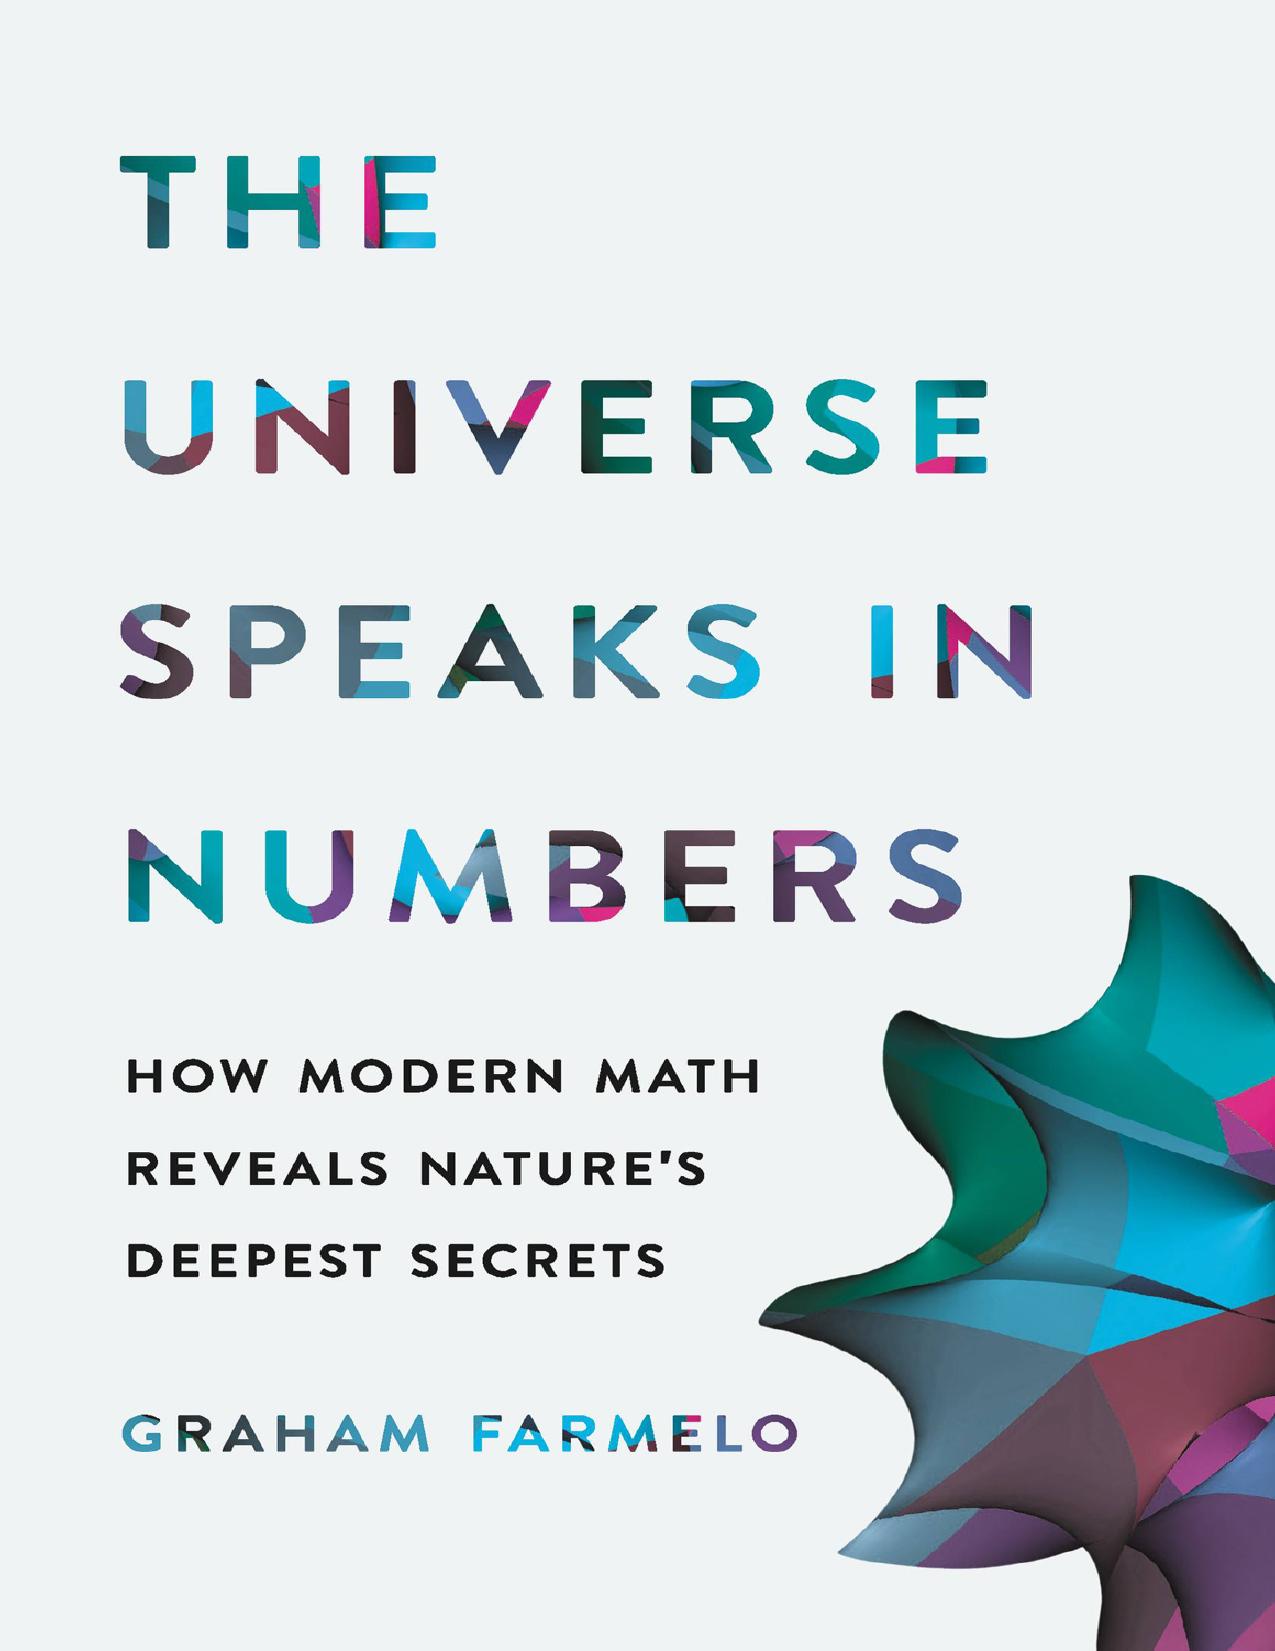 The Universe Speaks in Numbers by Graham Farmelo